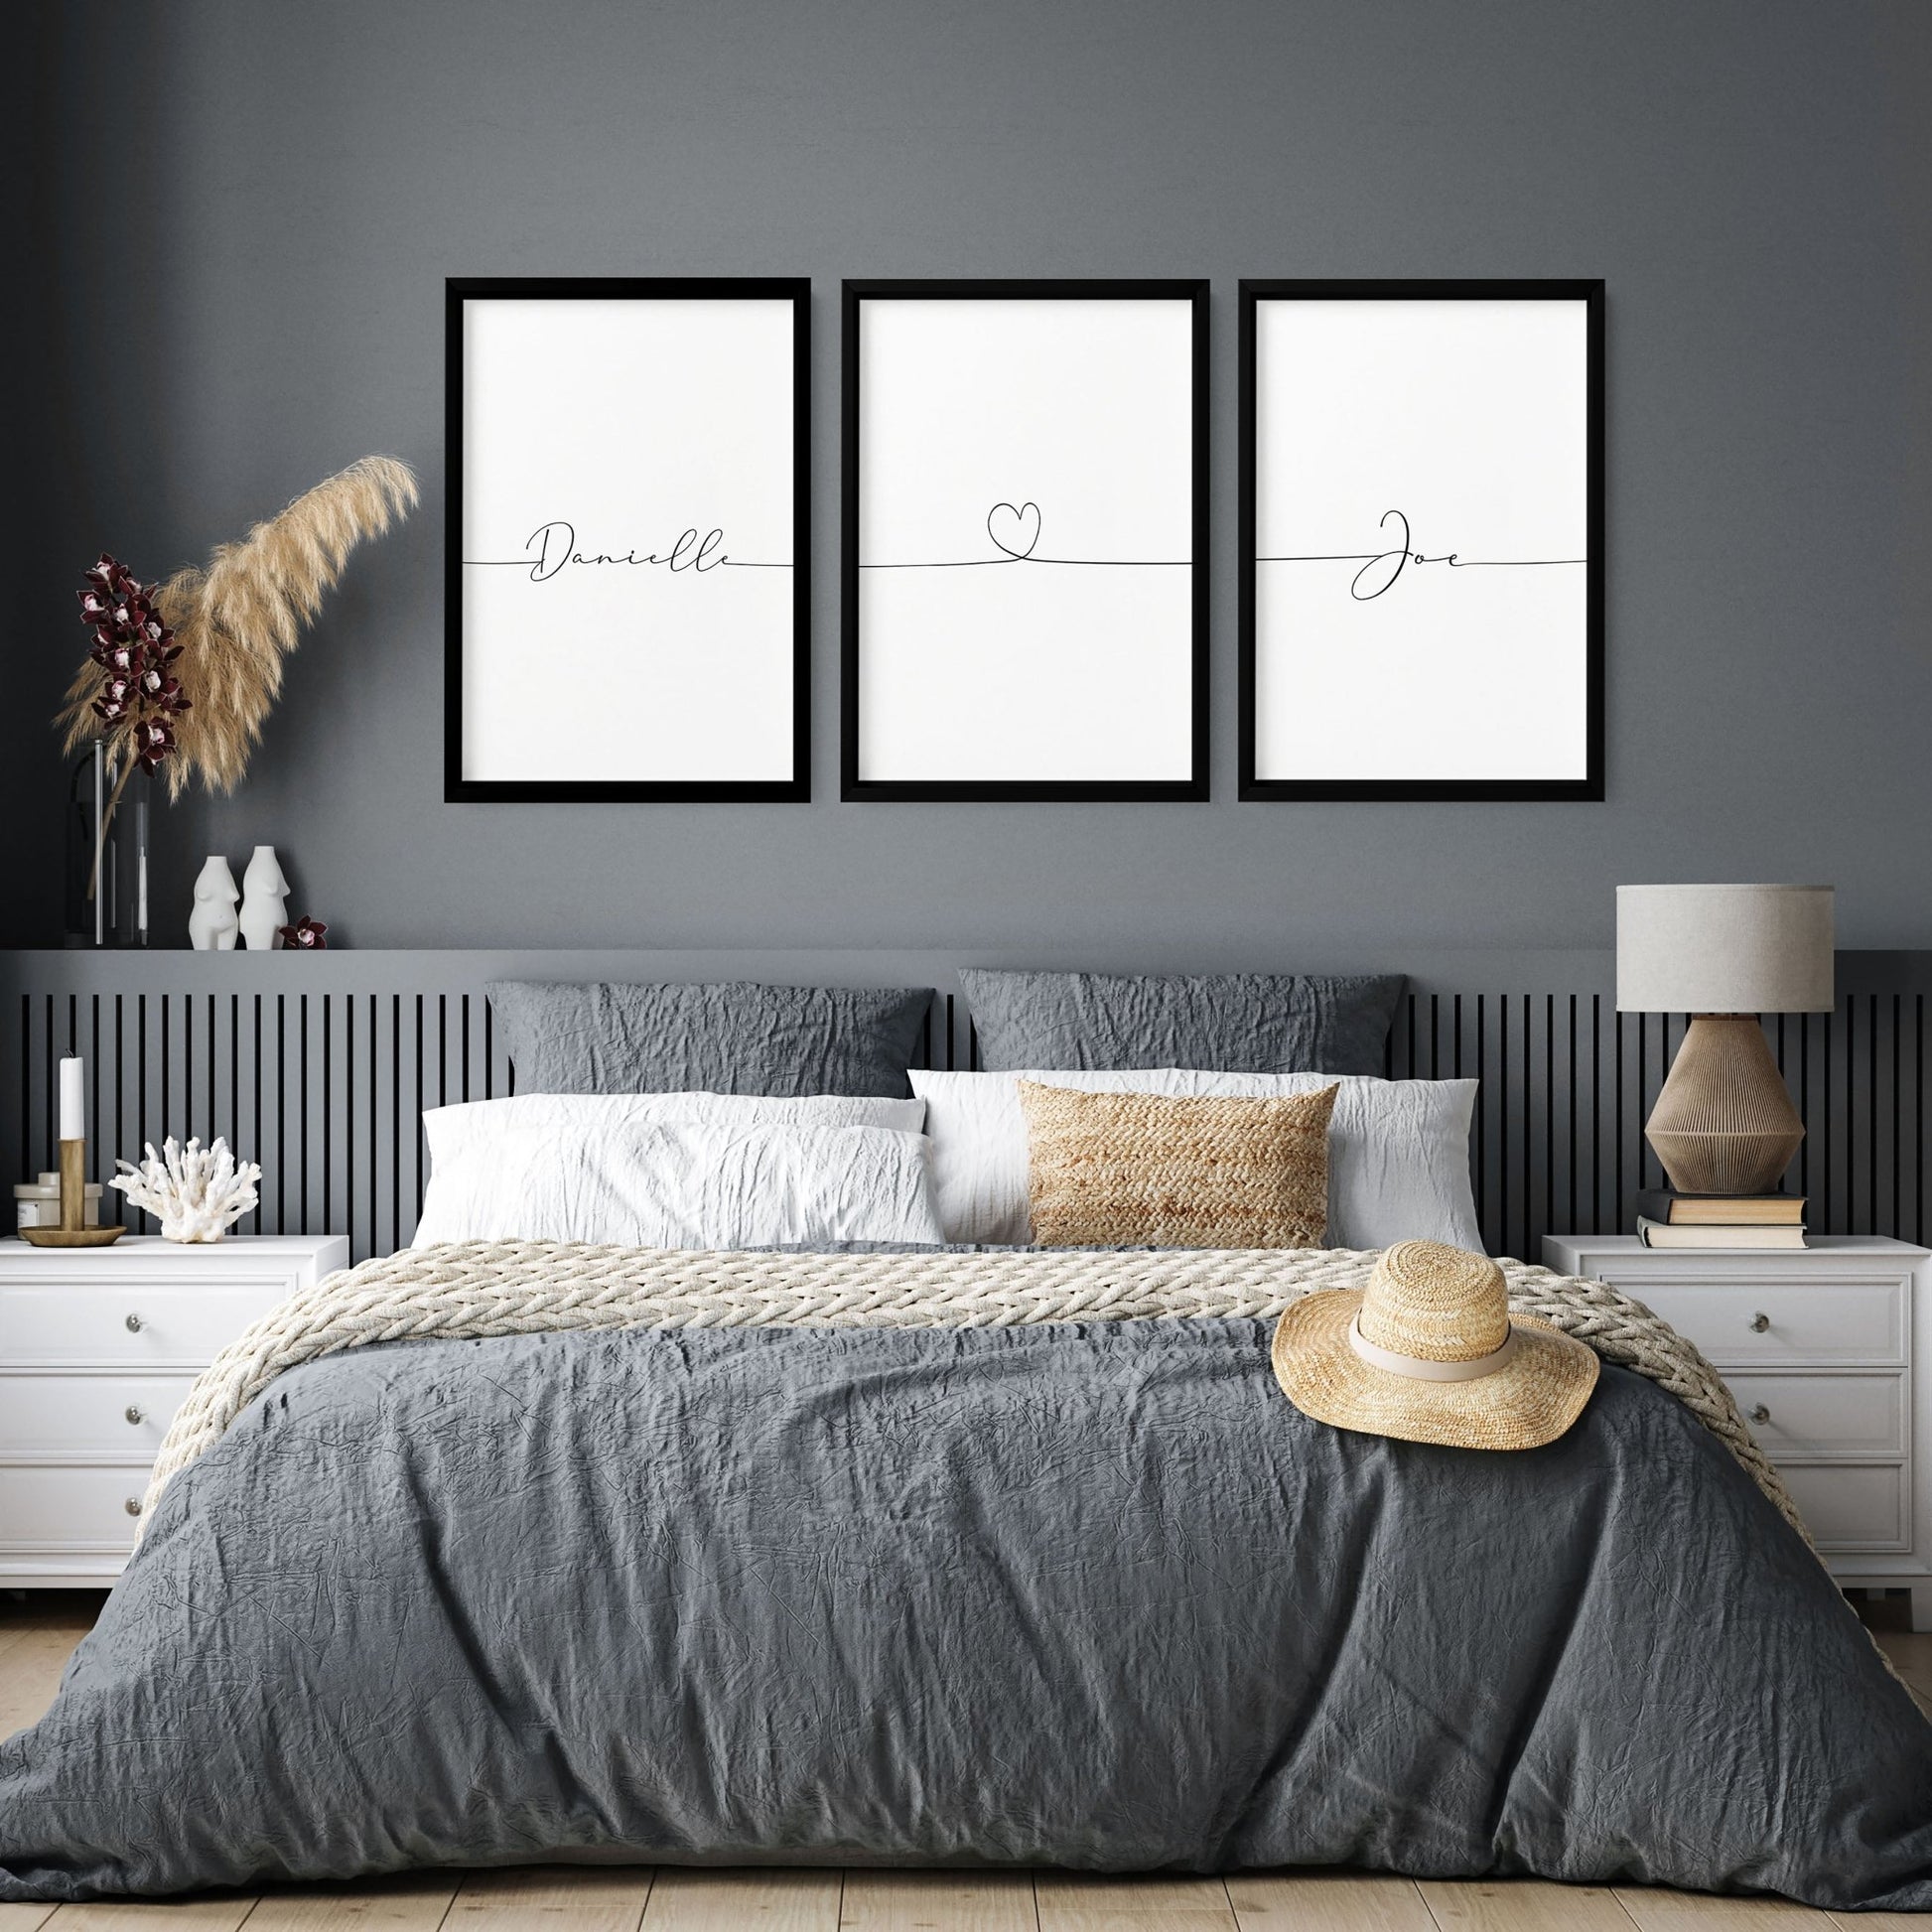 Customized valentines gift | set of 3 wall art prints for Master Bedroom - About Wall Art